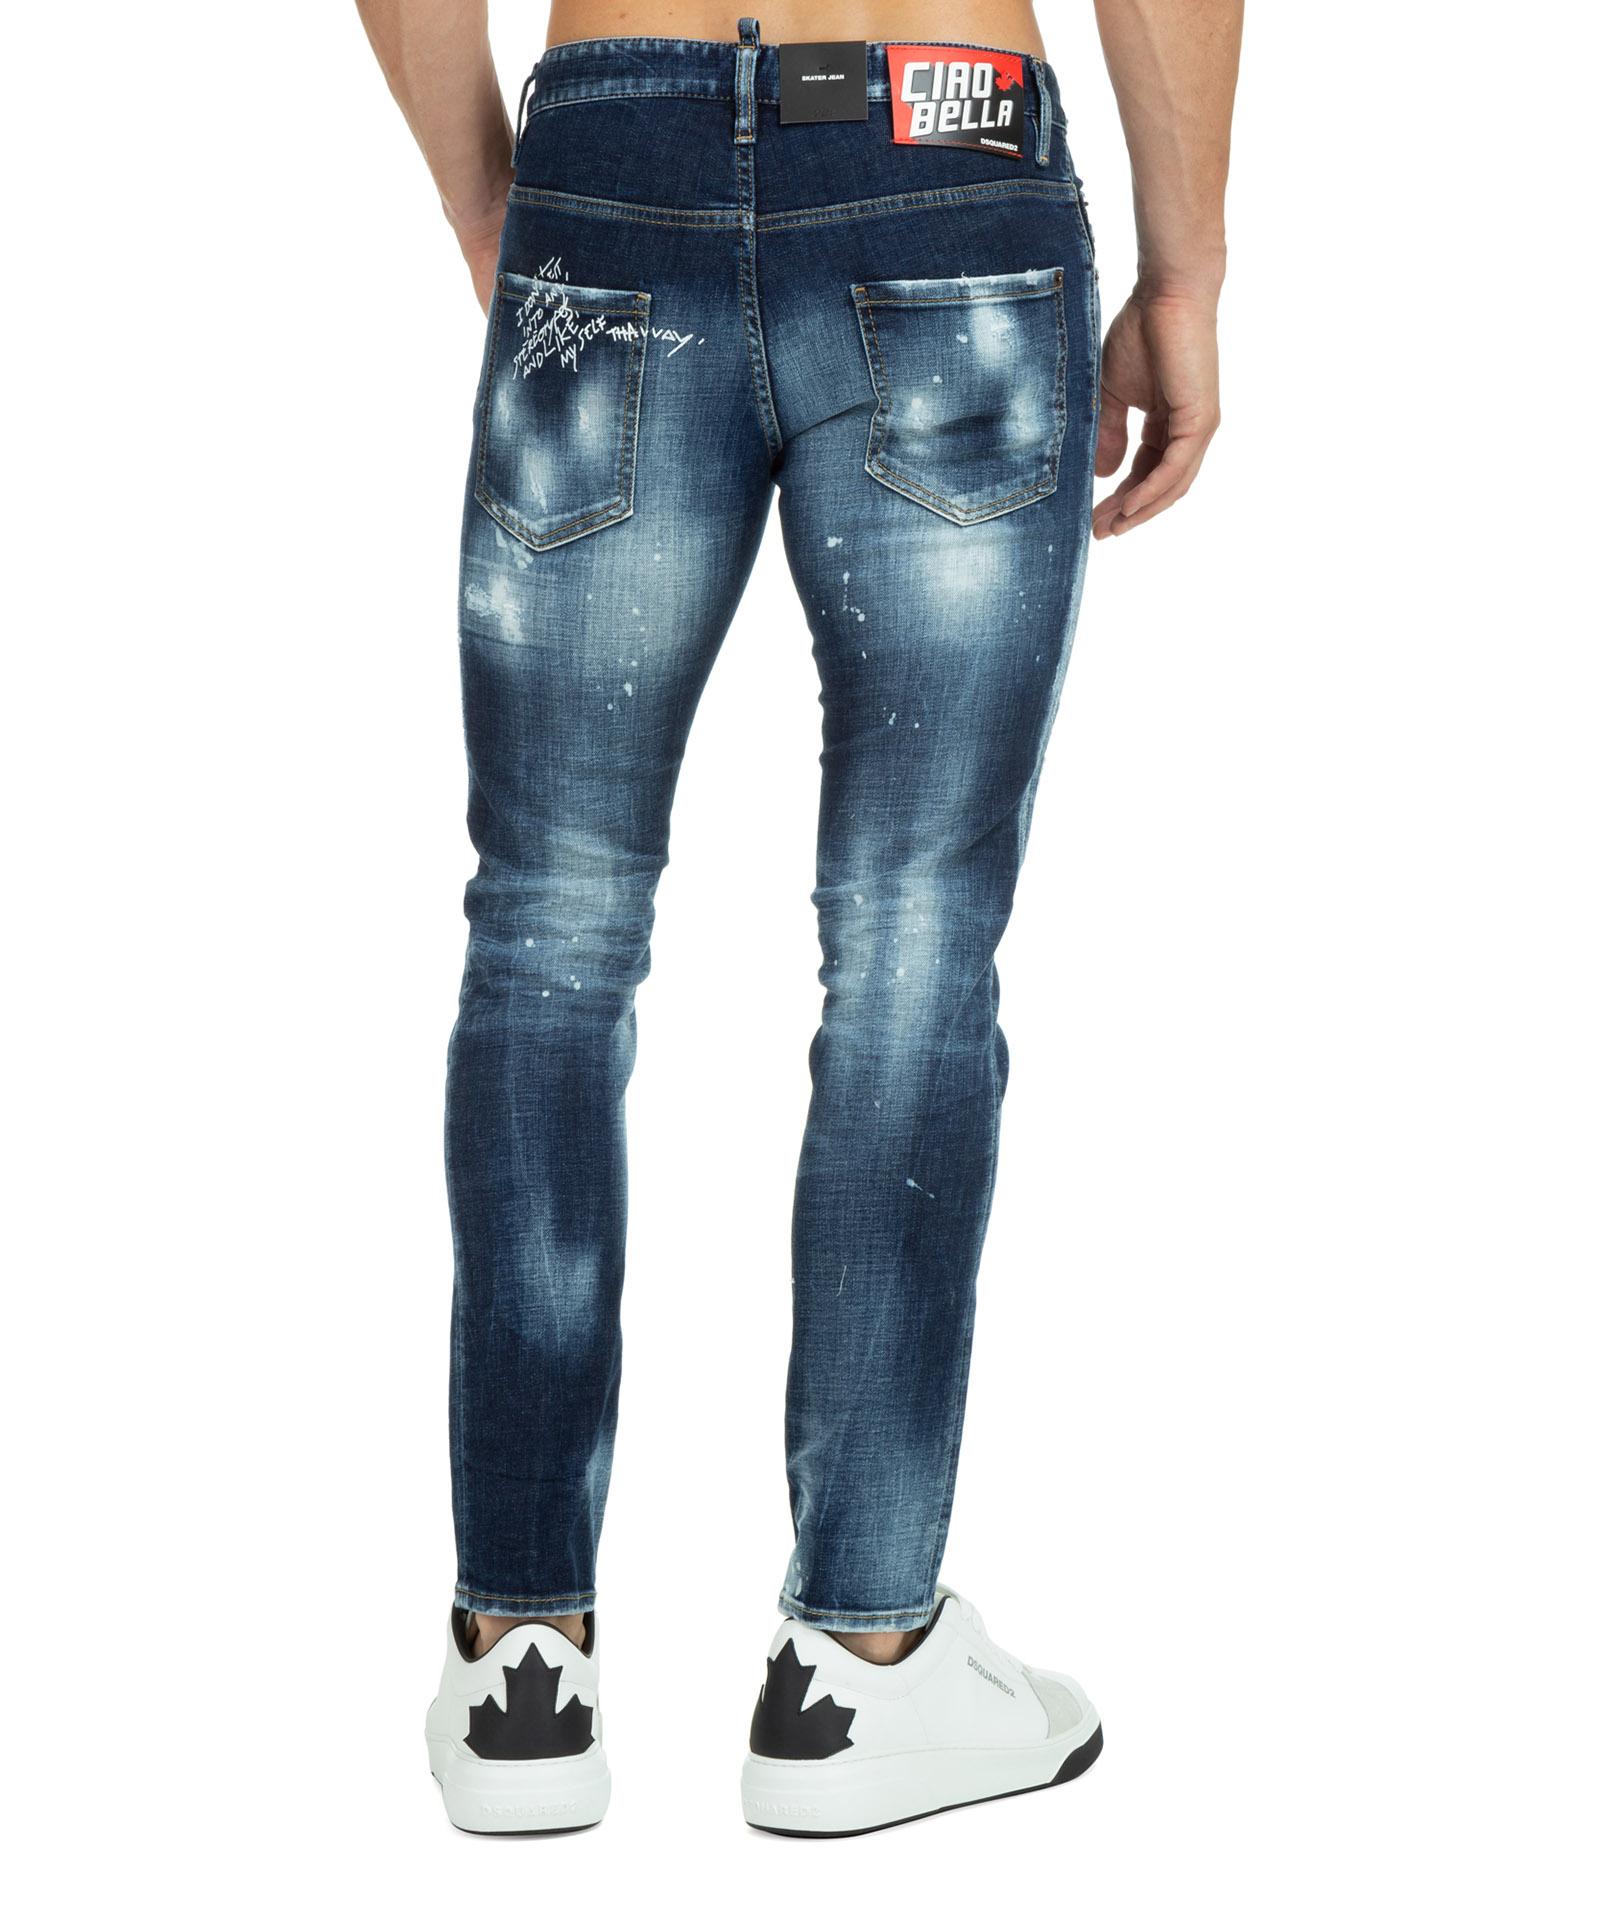 Skater Ciao Bella Jeans